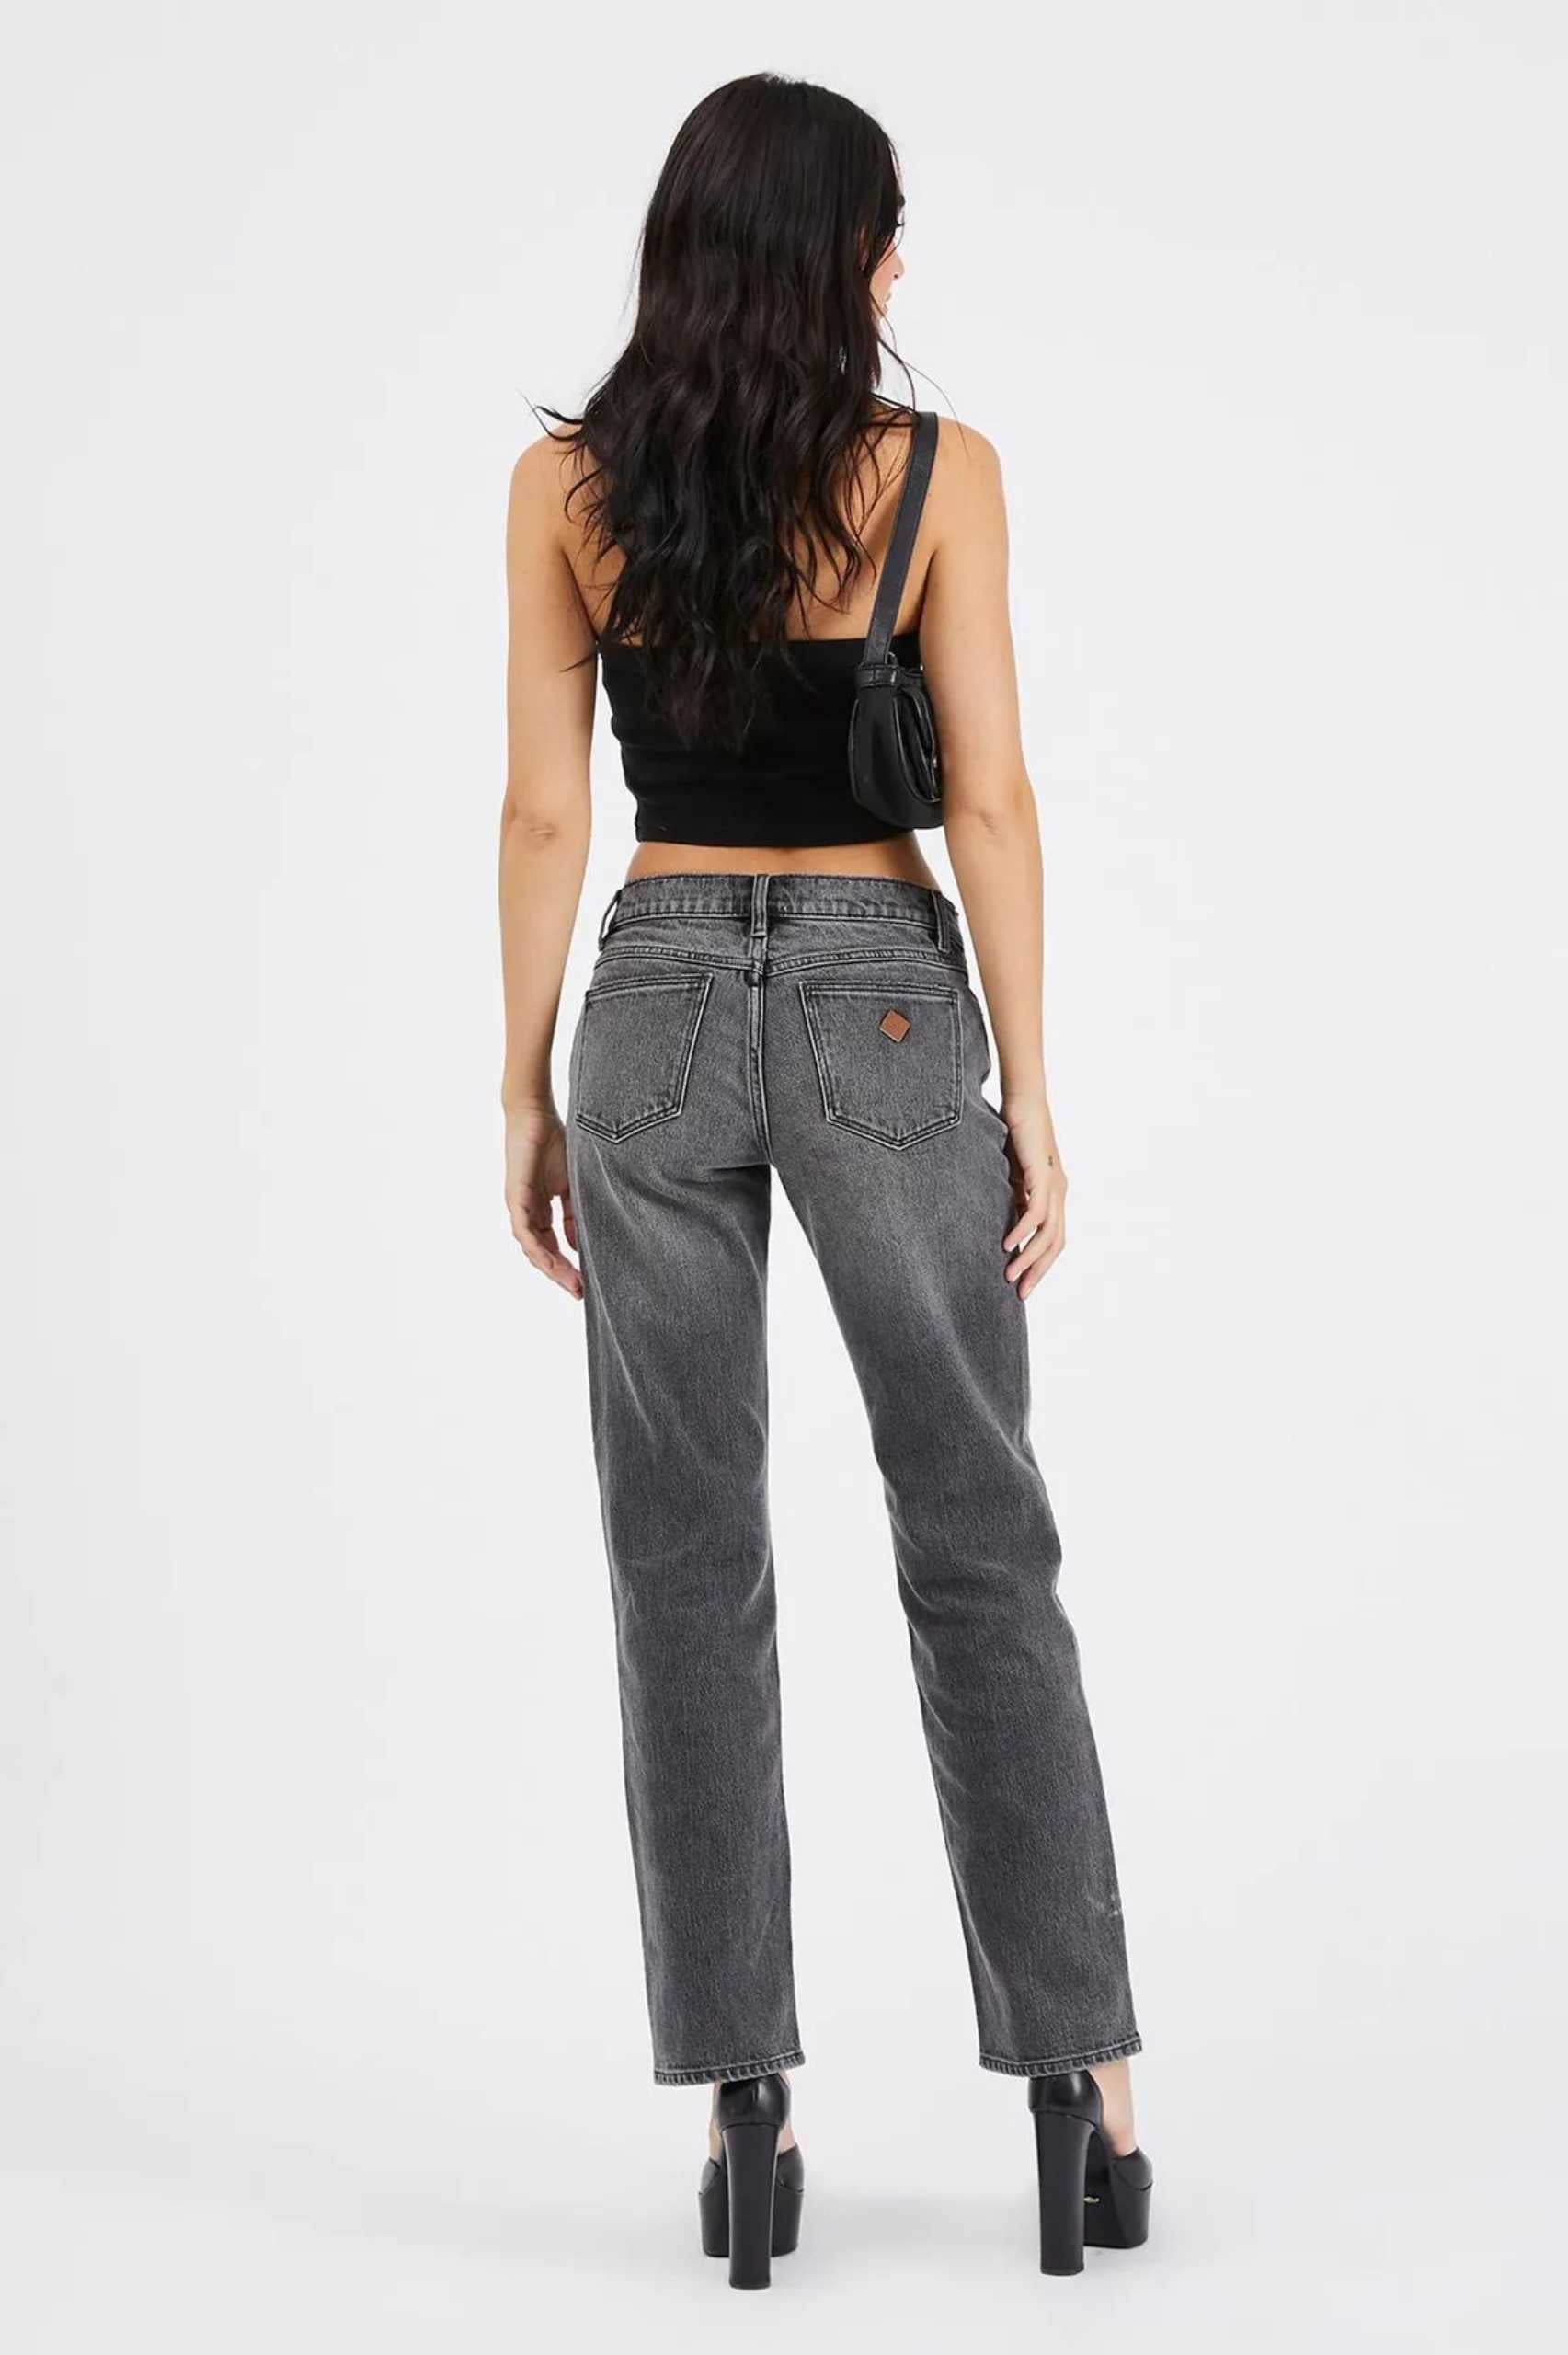 Abrand A 99 Low Straight Addison Jean in Vintage Black